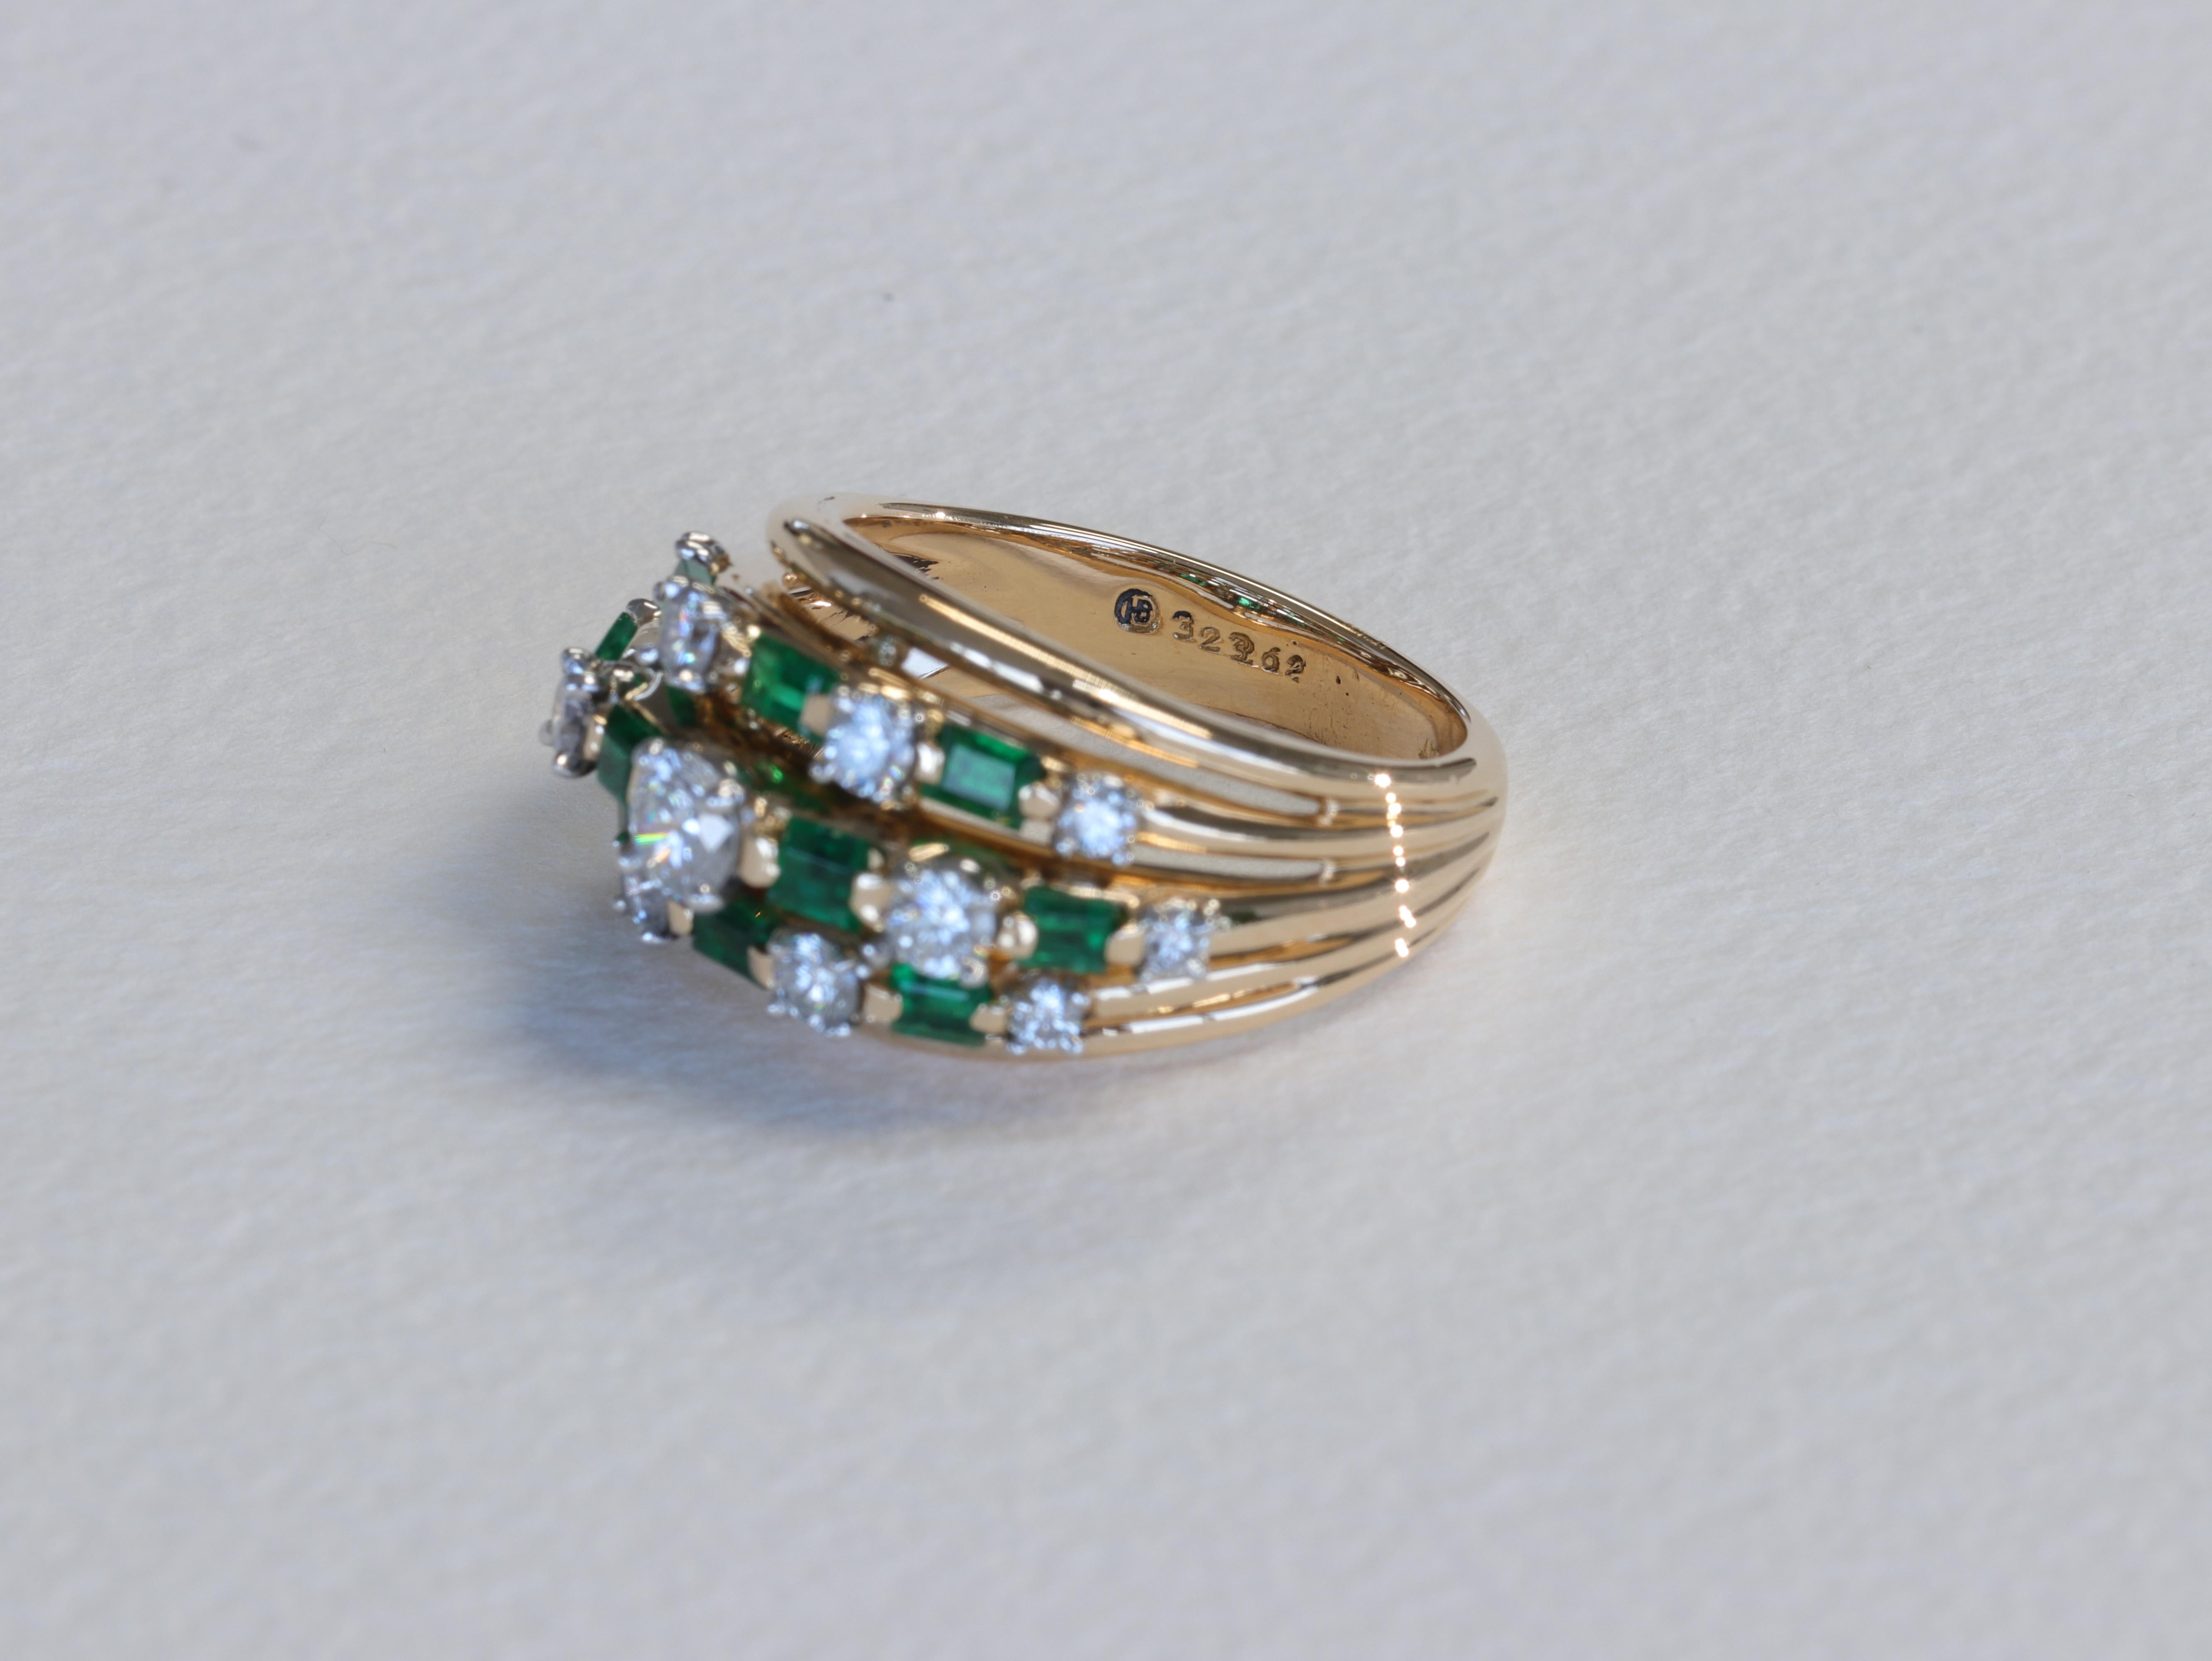 An iconic mid century by Oscar Heyman Bros. this Colombian emerald and diamond ring features approximately 0.80 carats of baguette cut vivid green emerlads and approximately 0.70 carats of round brilliant cut diamonds of D-F color and VVS-VS